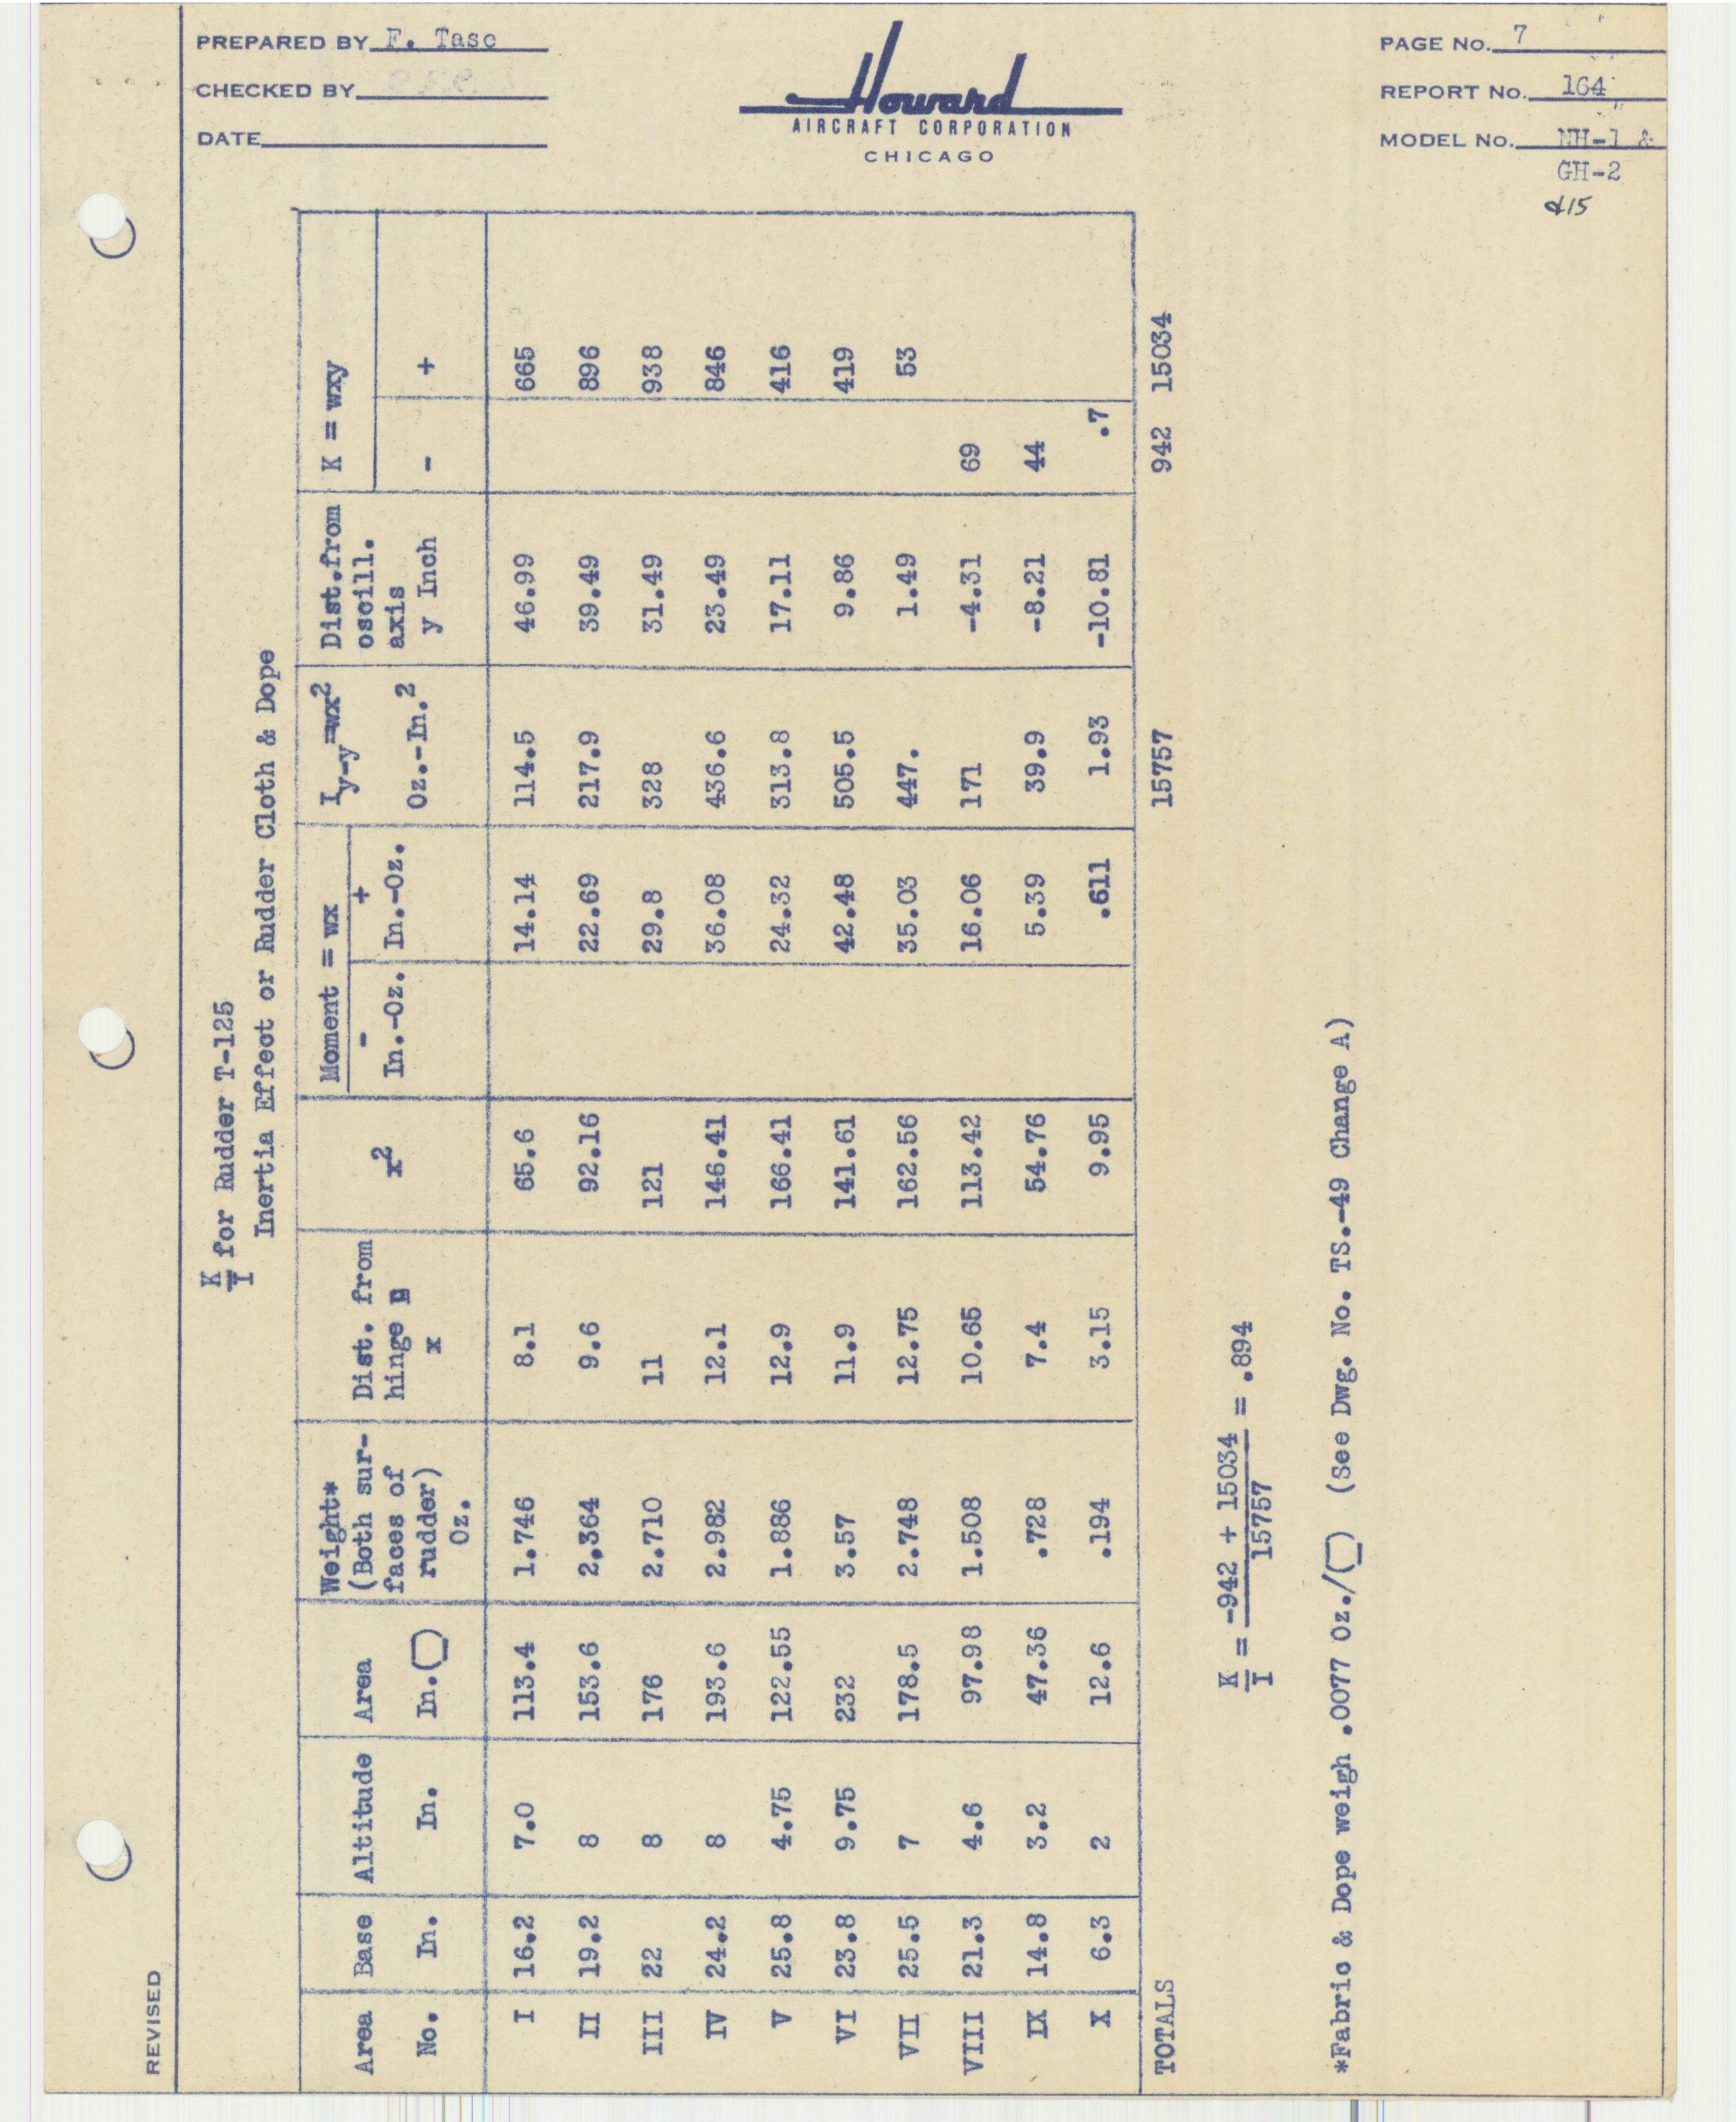 Sample page 10 from AirCorps Library document: Report 164, Dynamic Balance Coefficients for Rudder & Elevators, DGA-15